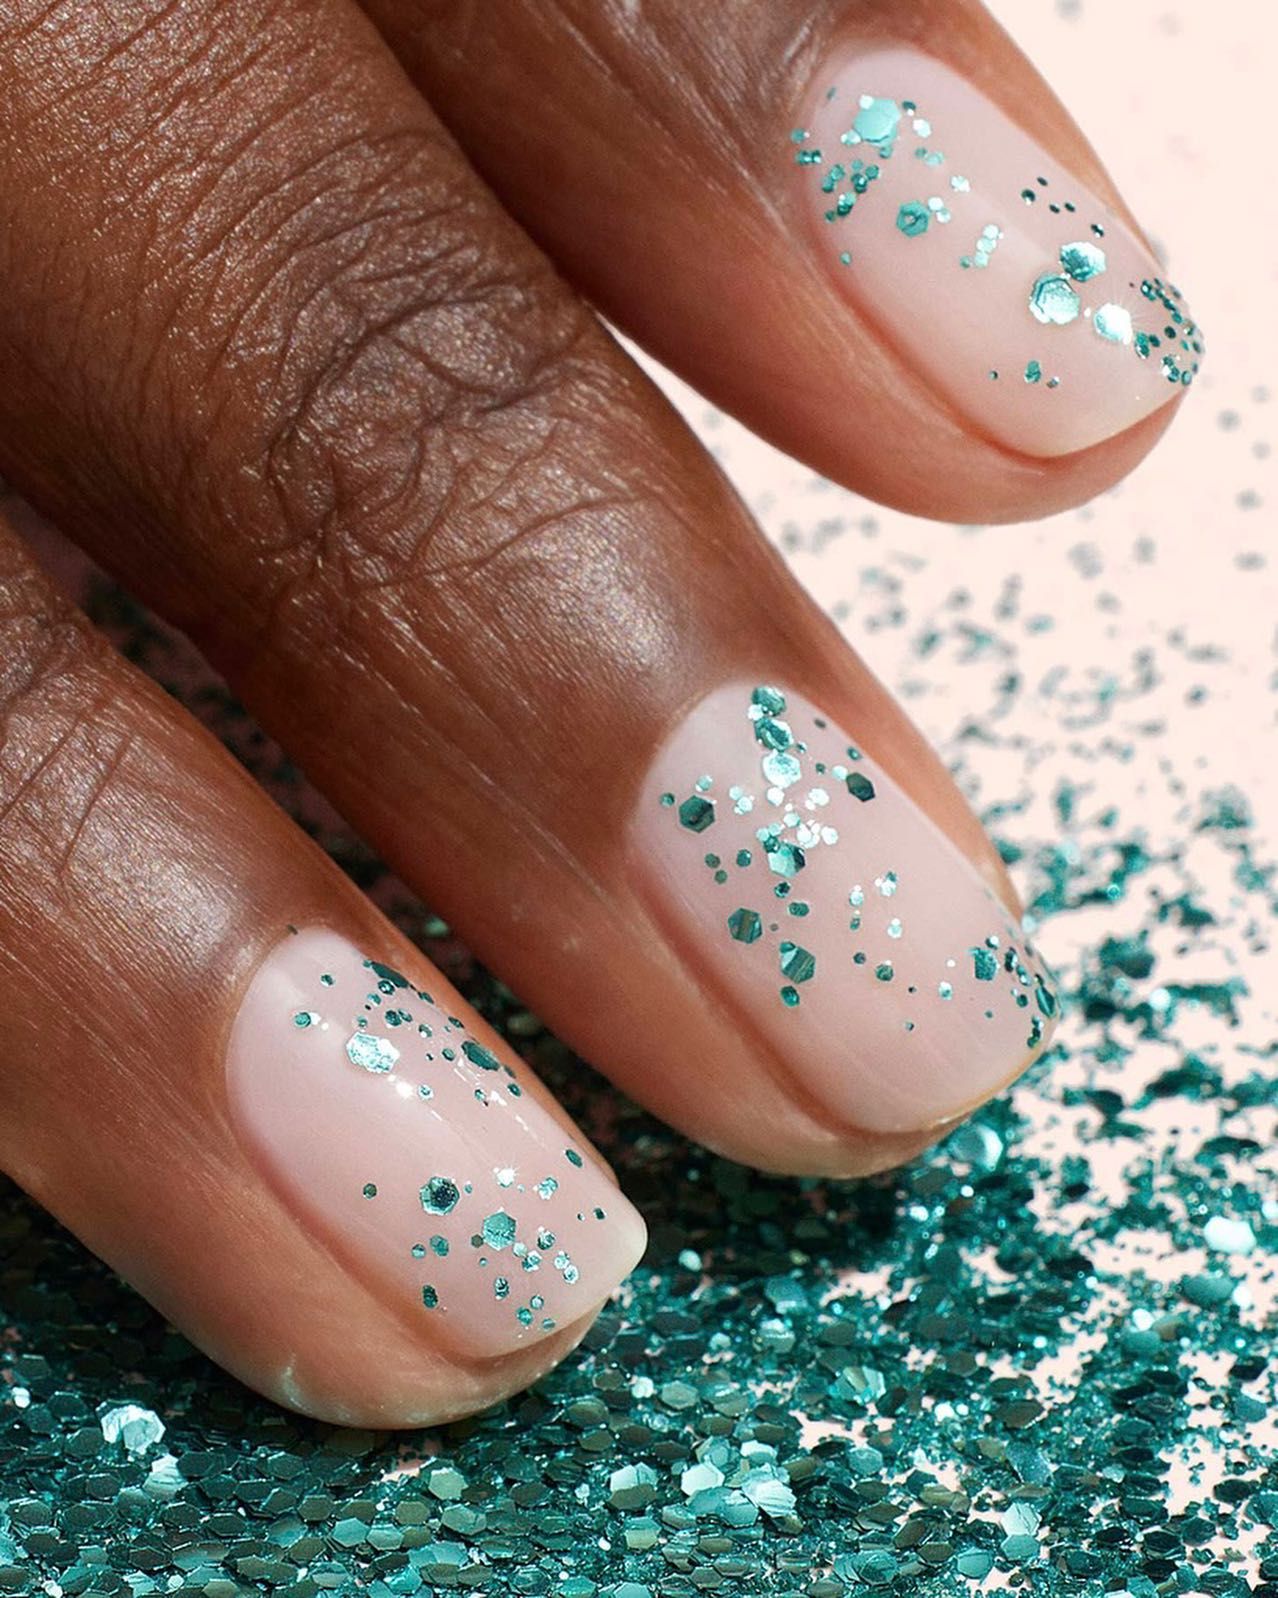 Artsy Manicures: A Guide to Miami's Best Nail Art Salons